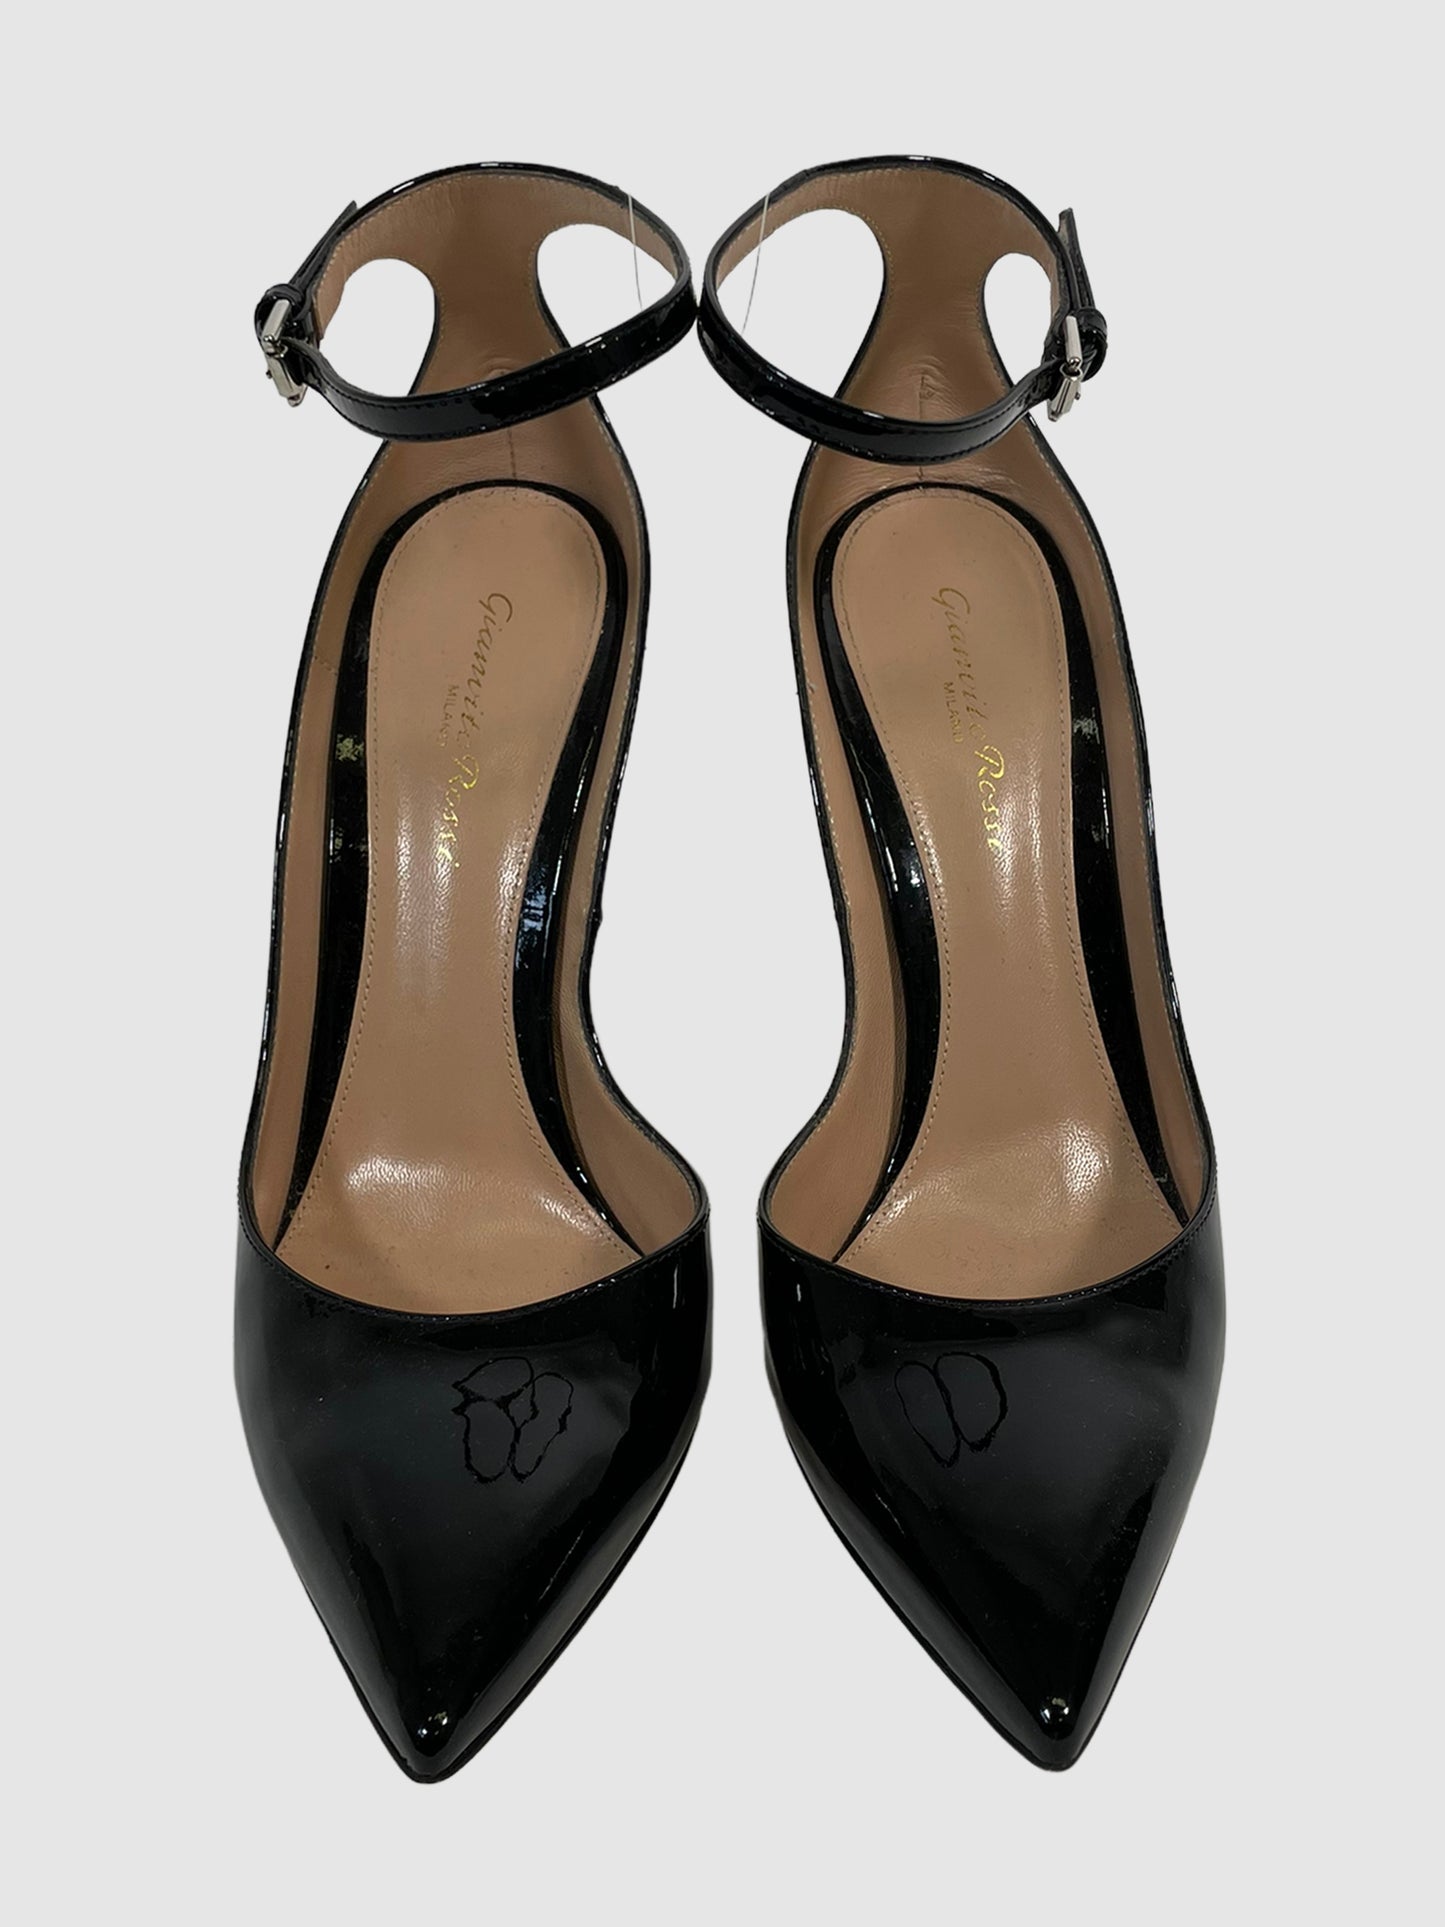 Gianvito Rossi Patent Leather Pointed Toe Pumps - Size 40